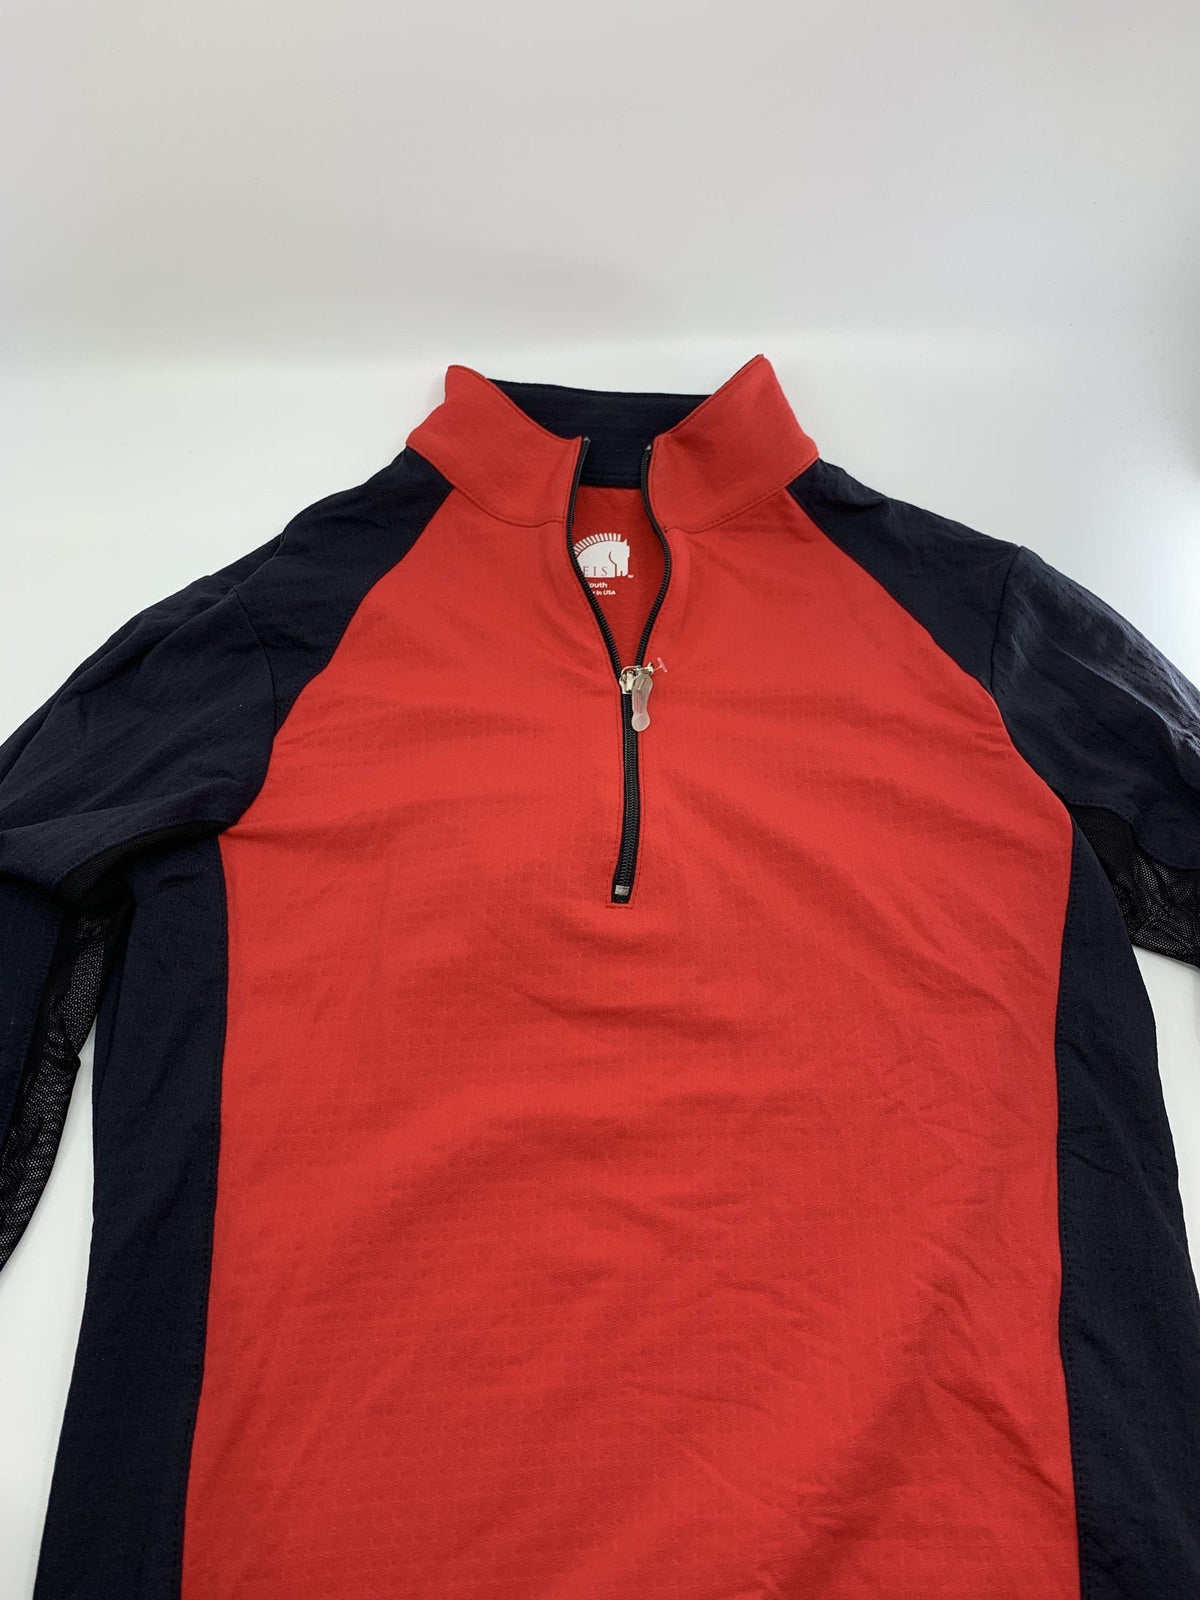 EIS Youth Shirt EIS- Youth Sun Shirts 2-4 equestrian team apparel online tack store mobile tack store custom farm apparel custom show stable clothing equestrian lifestyle horse show clothing riding clothes ETA Kids Equestrian Fashion | EIS Sun Shirts horses equestrian tack store